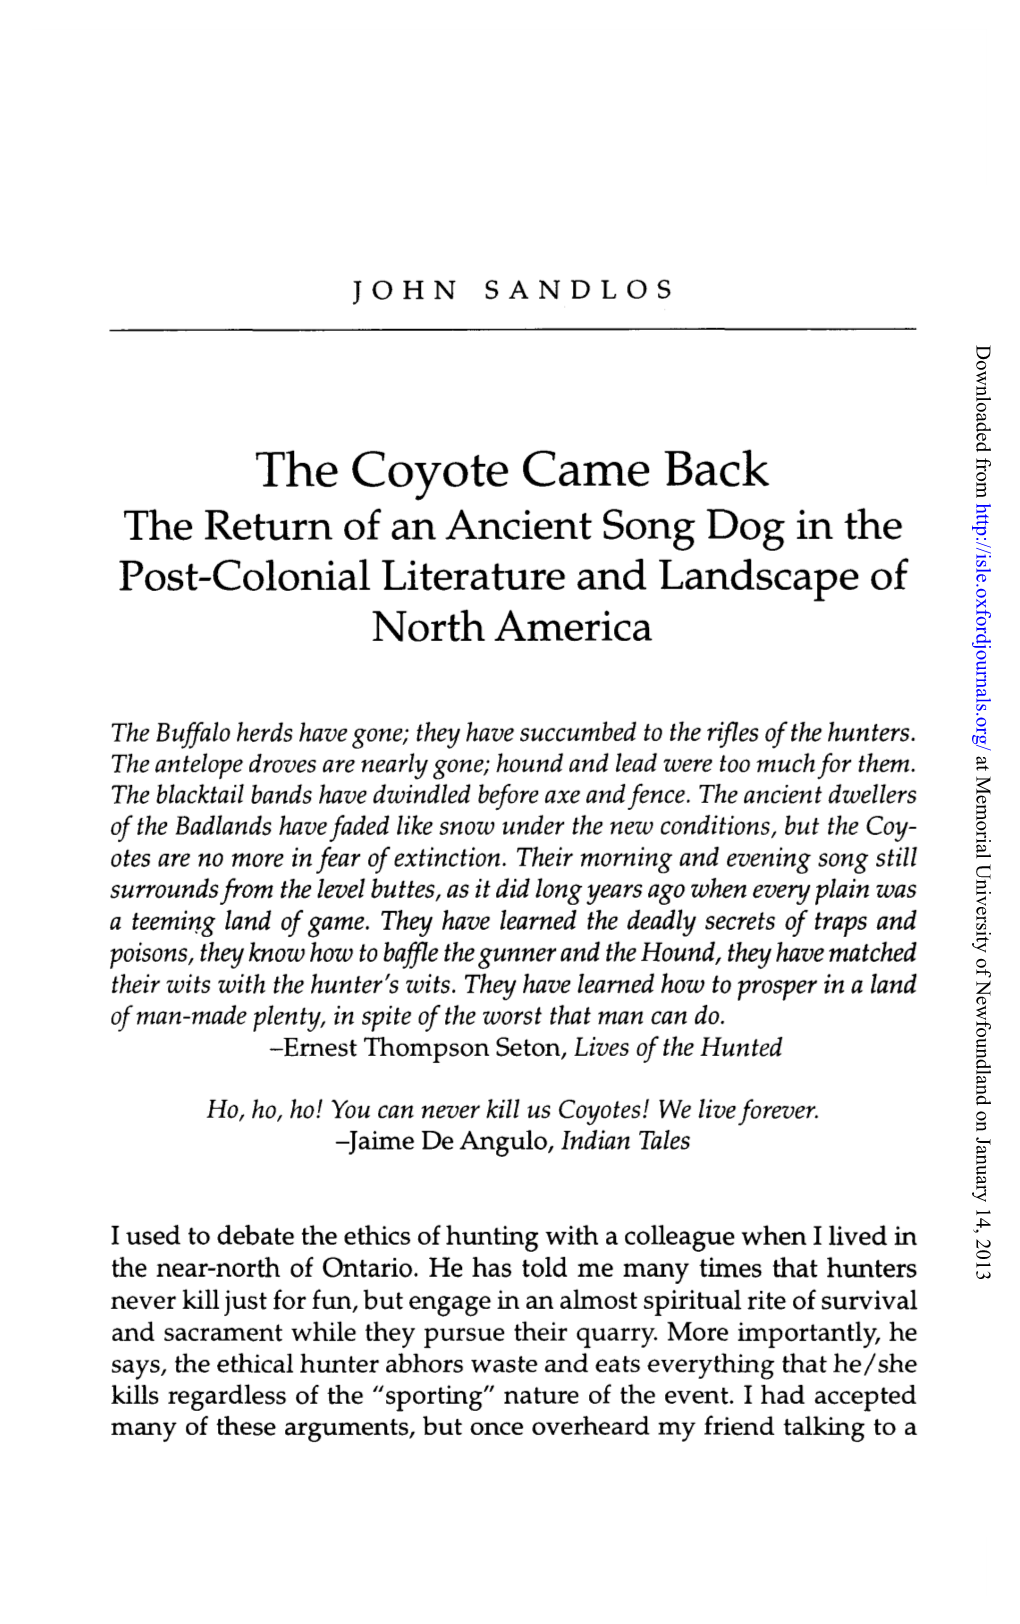 The Coyote Came Back the Return of an Ancient Song Dog in the Post-Colonial Literature and Landscape of North America